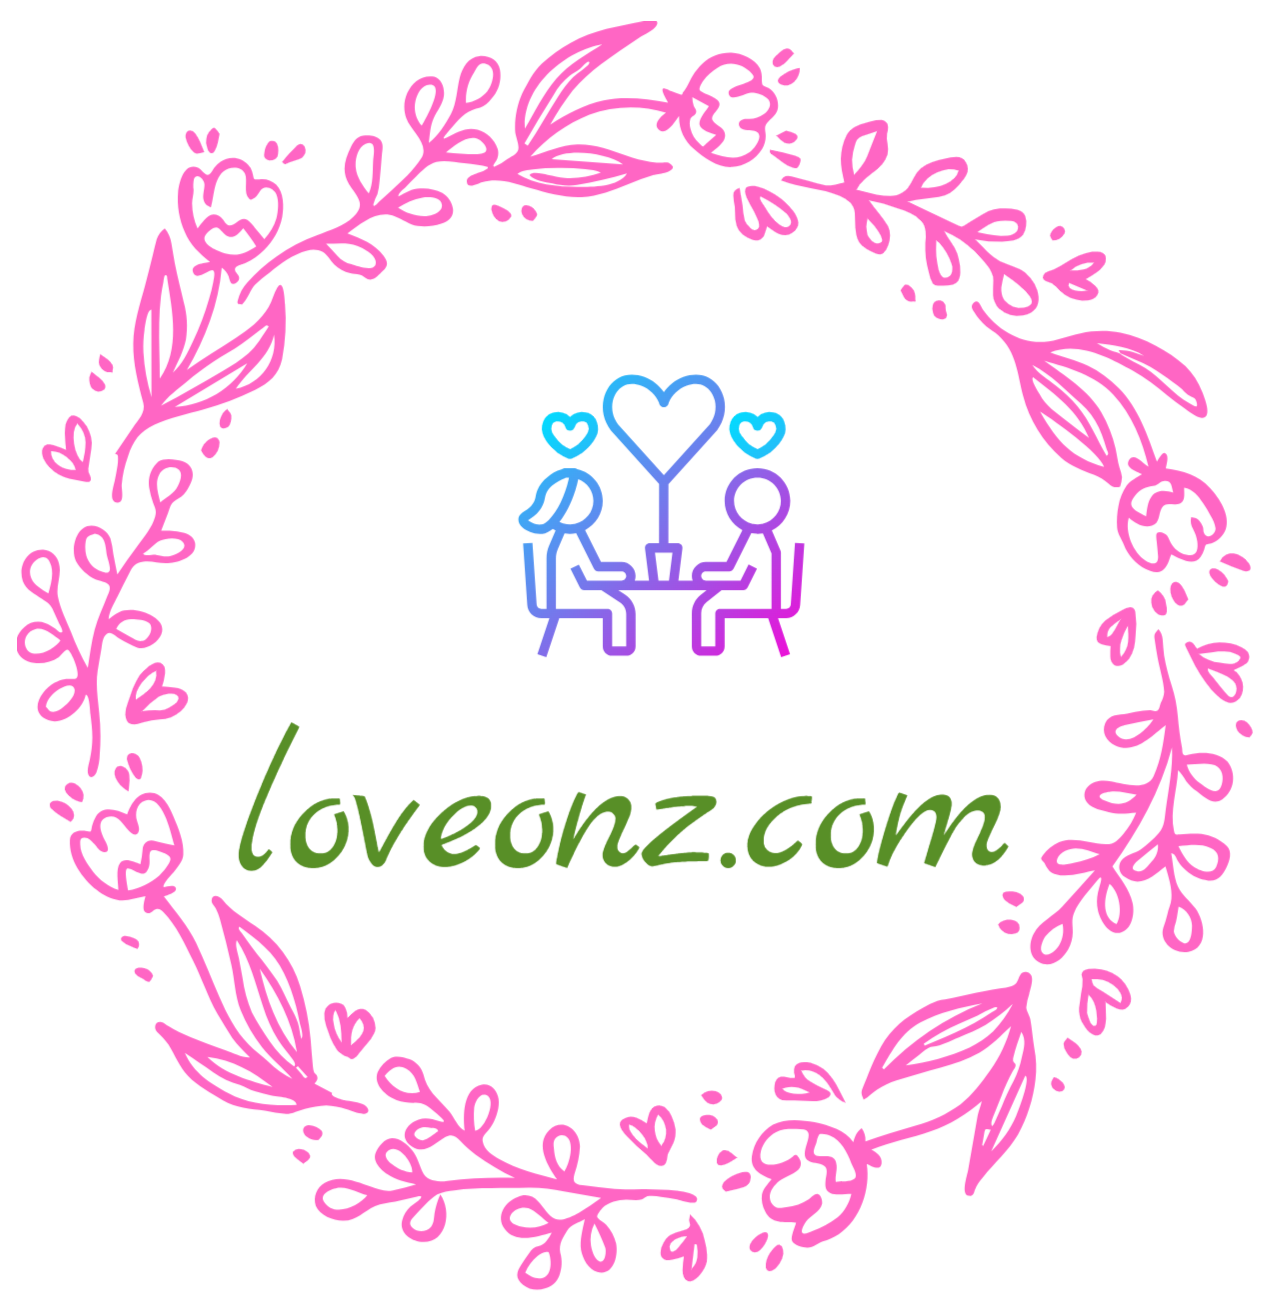 loveonz.com is for sale